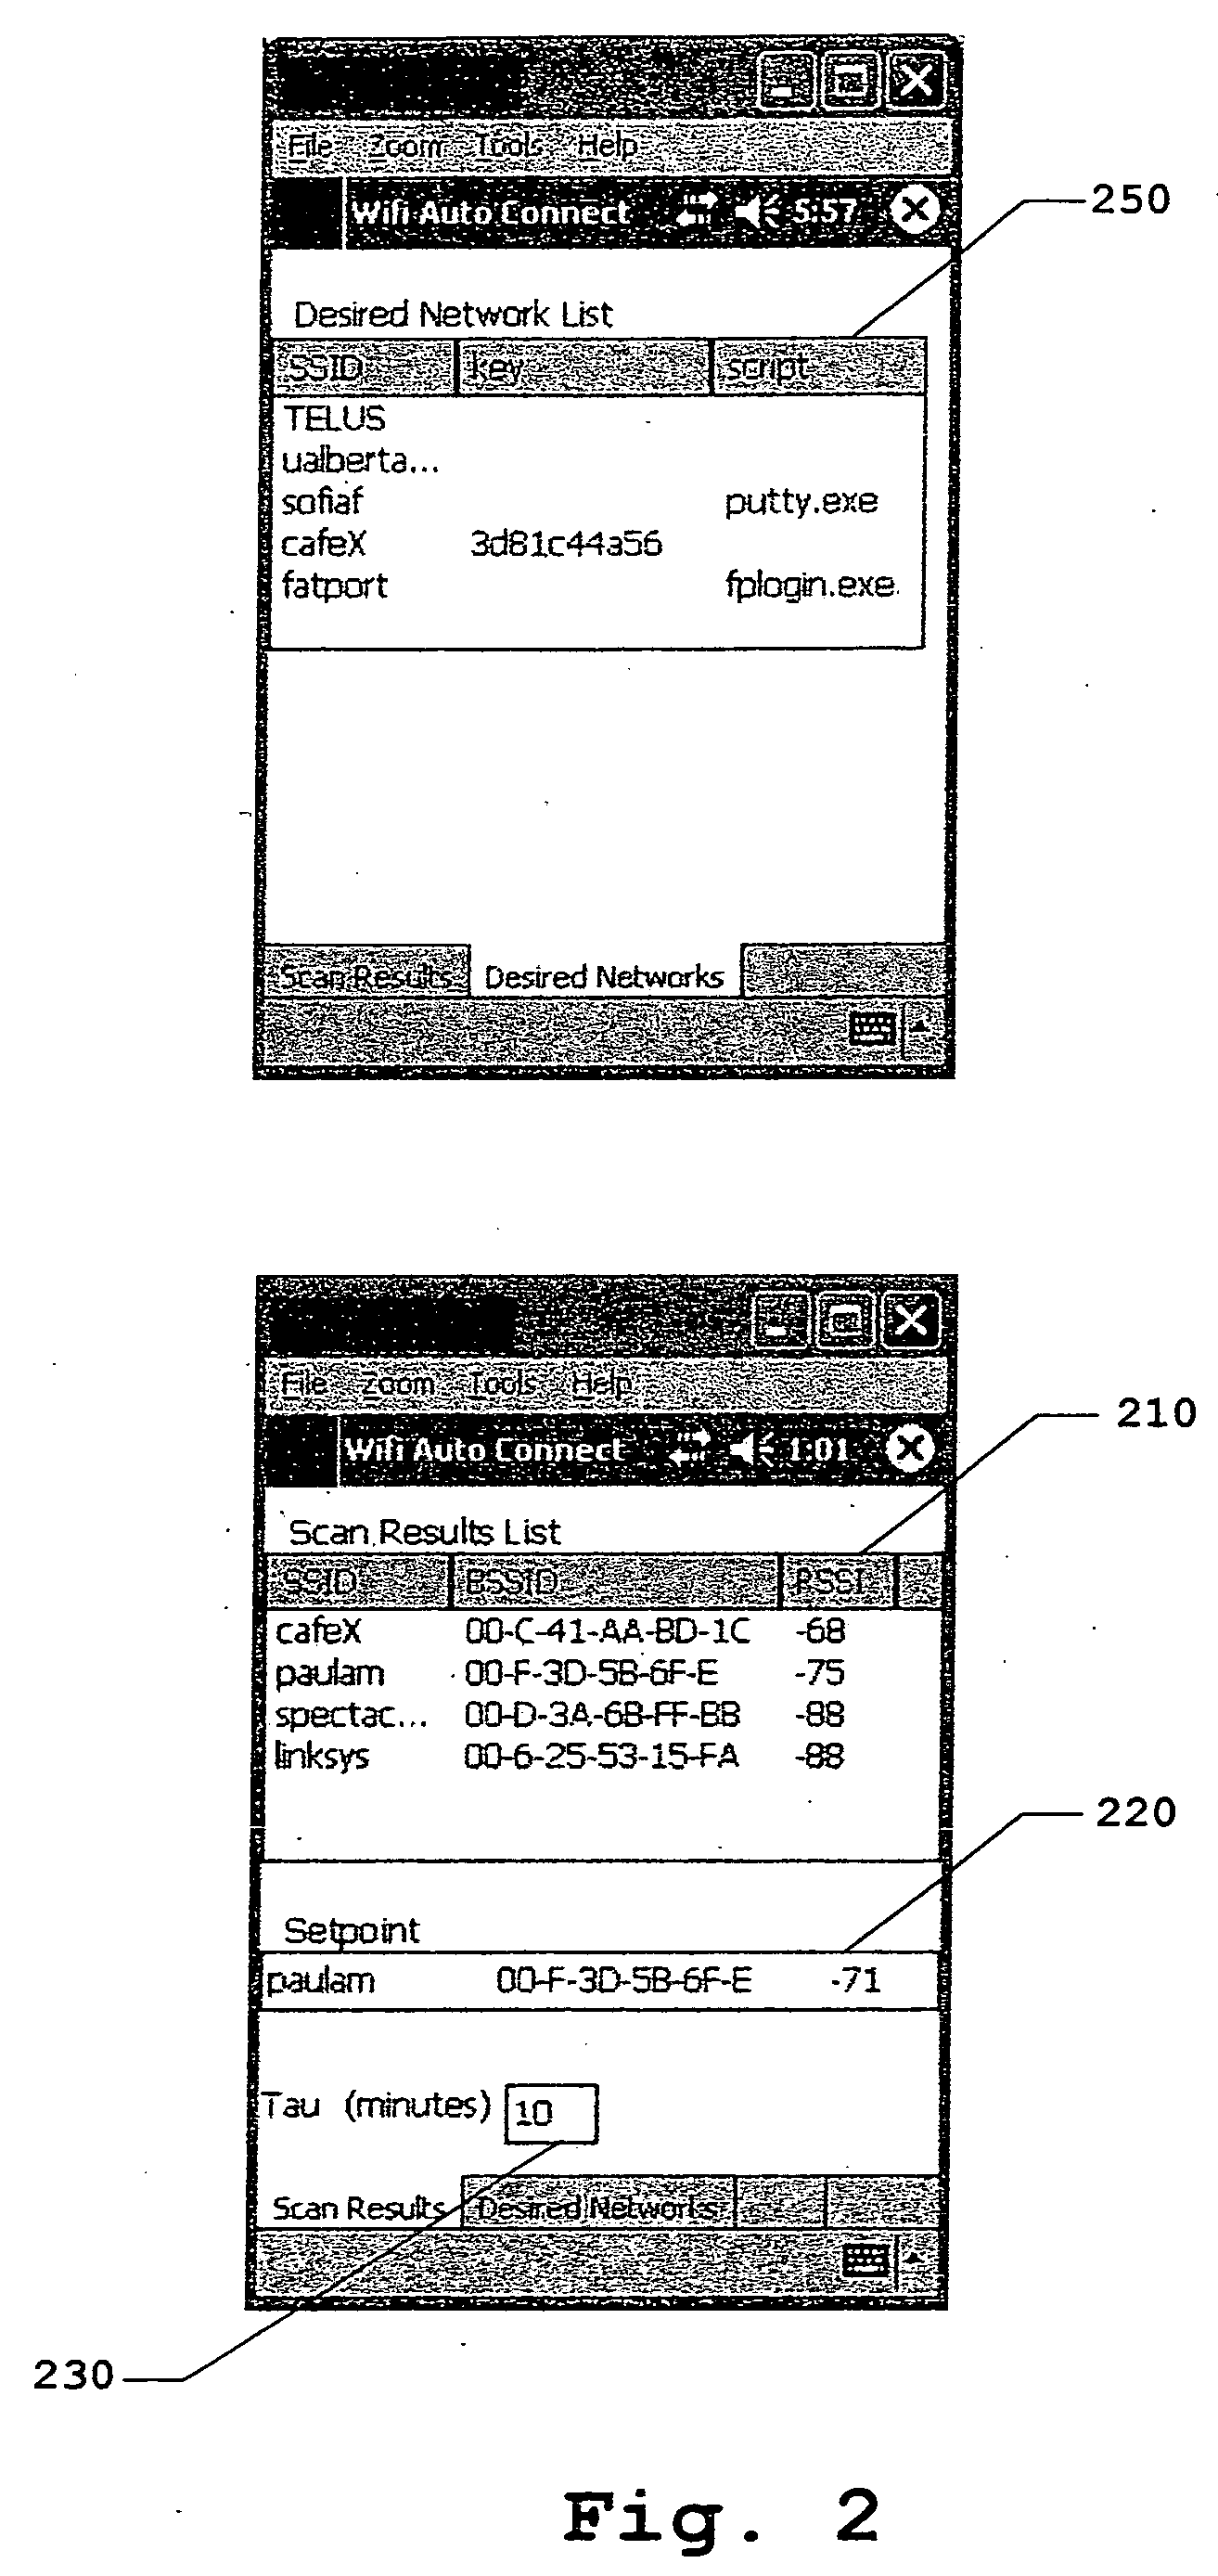 Automatic connection of a mobile device to a wireless network